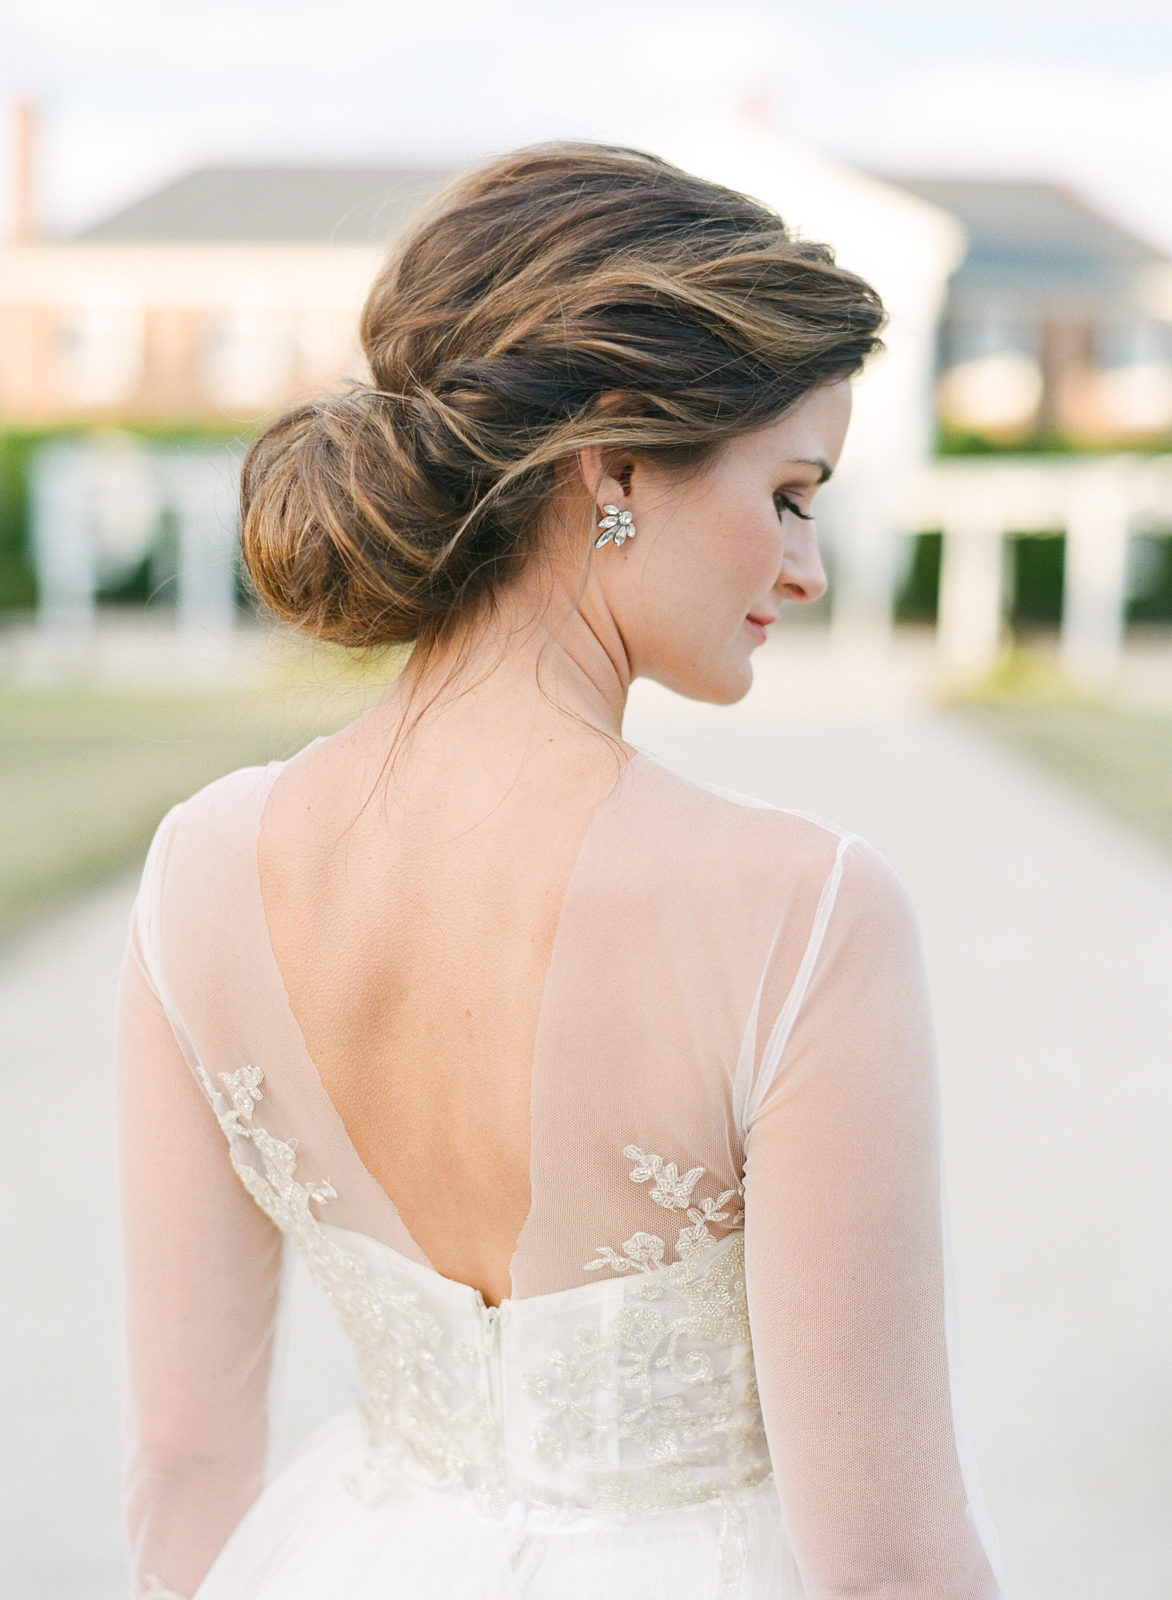 Romantic Bridal Hairstyles Photographed by Molly Carr Photography | Fine Art Bridal Hair and Makeup | Paris Wedding Photographer | Paris Film Photographer | France Destination Wedding | Boone Hall Plantation Wedding in Charleston, South Carolina with The Petal Report